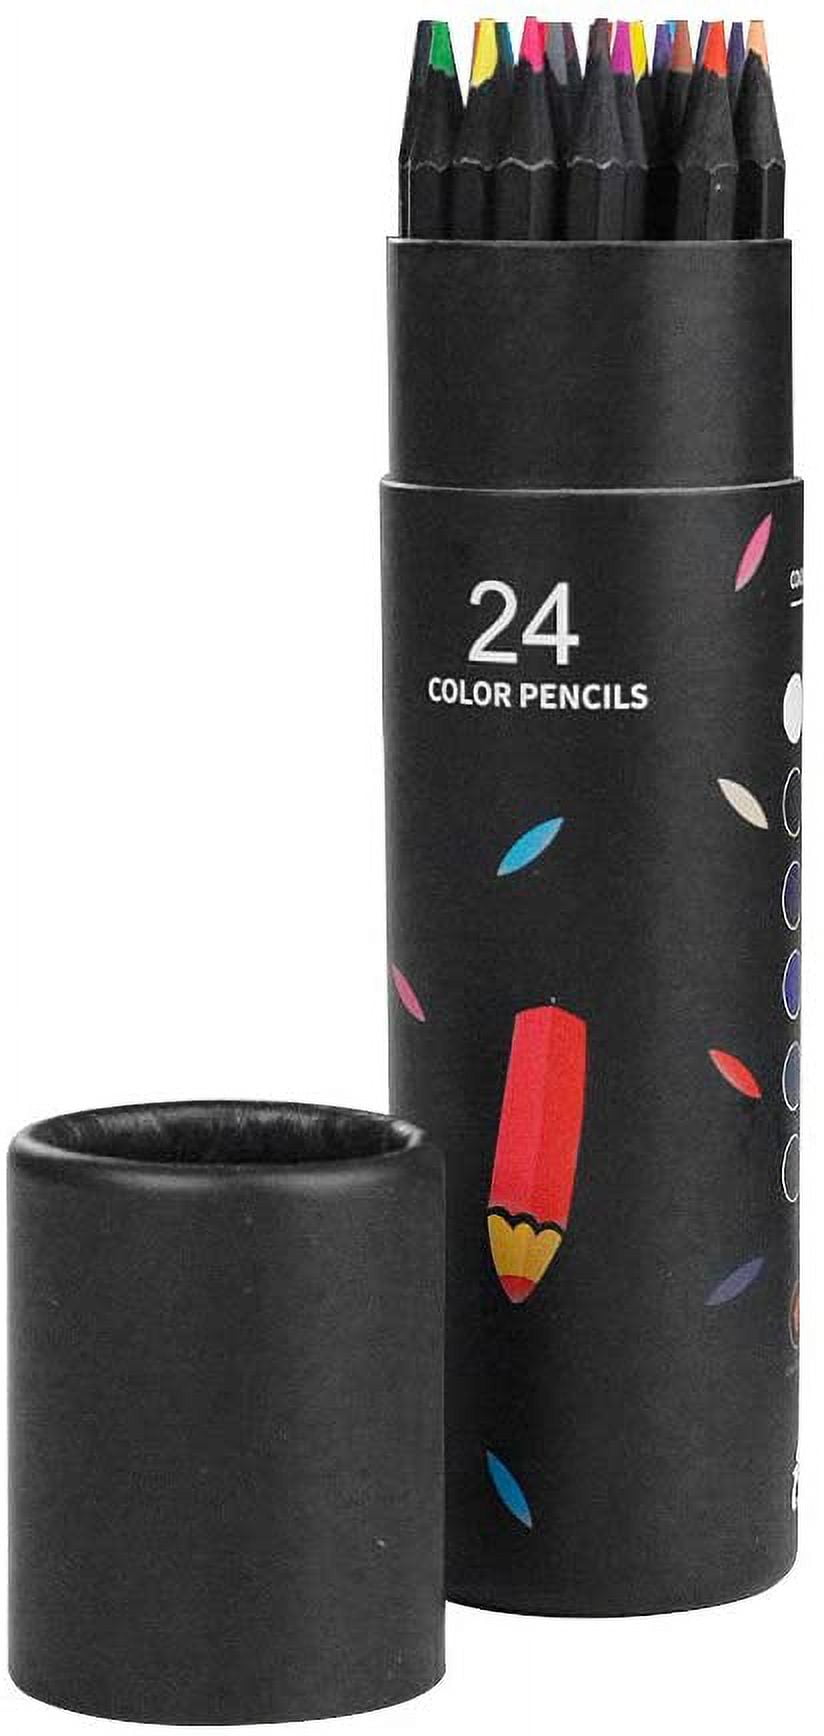 EZWORK Colored Pencils, 24 Color Coloring Pencils Set with Built-in  Sharpener, Presharpened Pencils with Storage Tube, Soft Core Art Drawing  Pencils